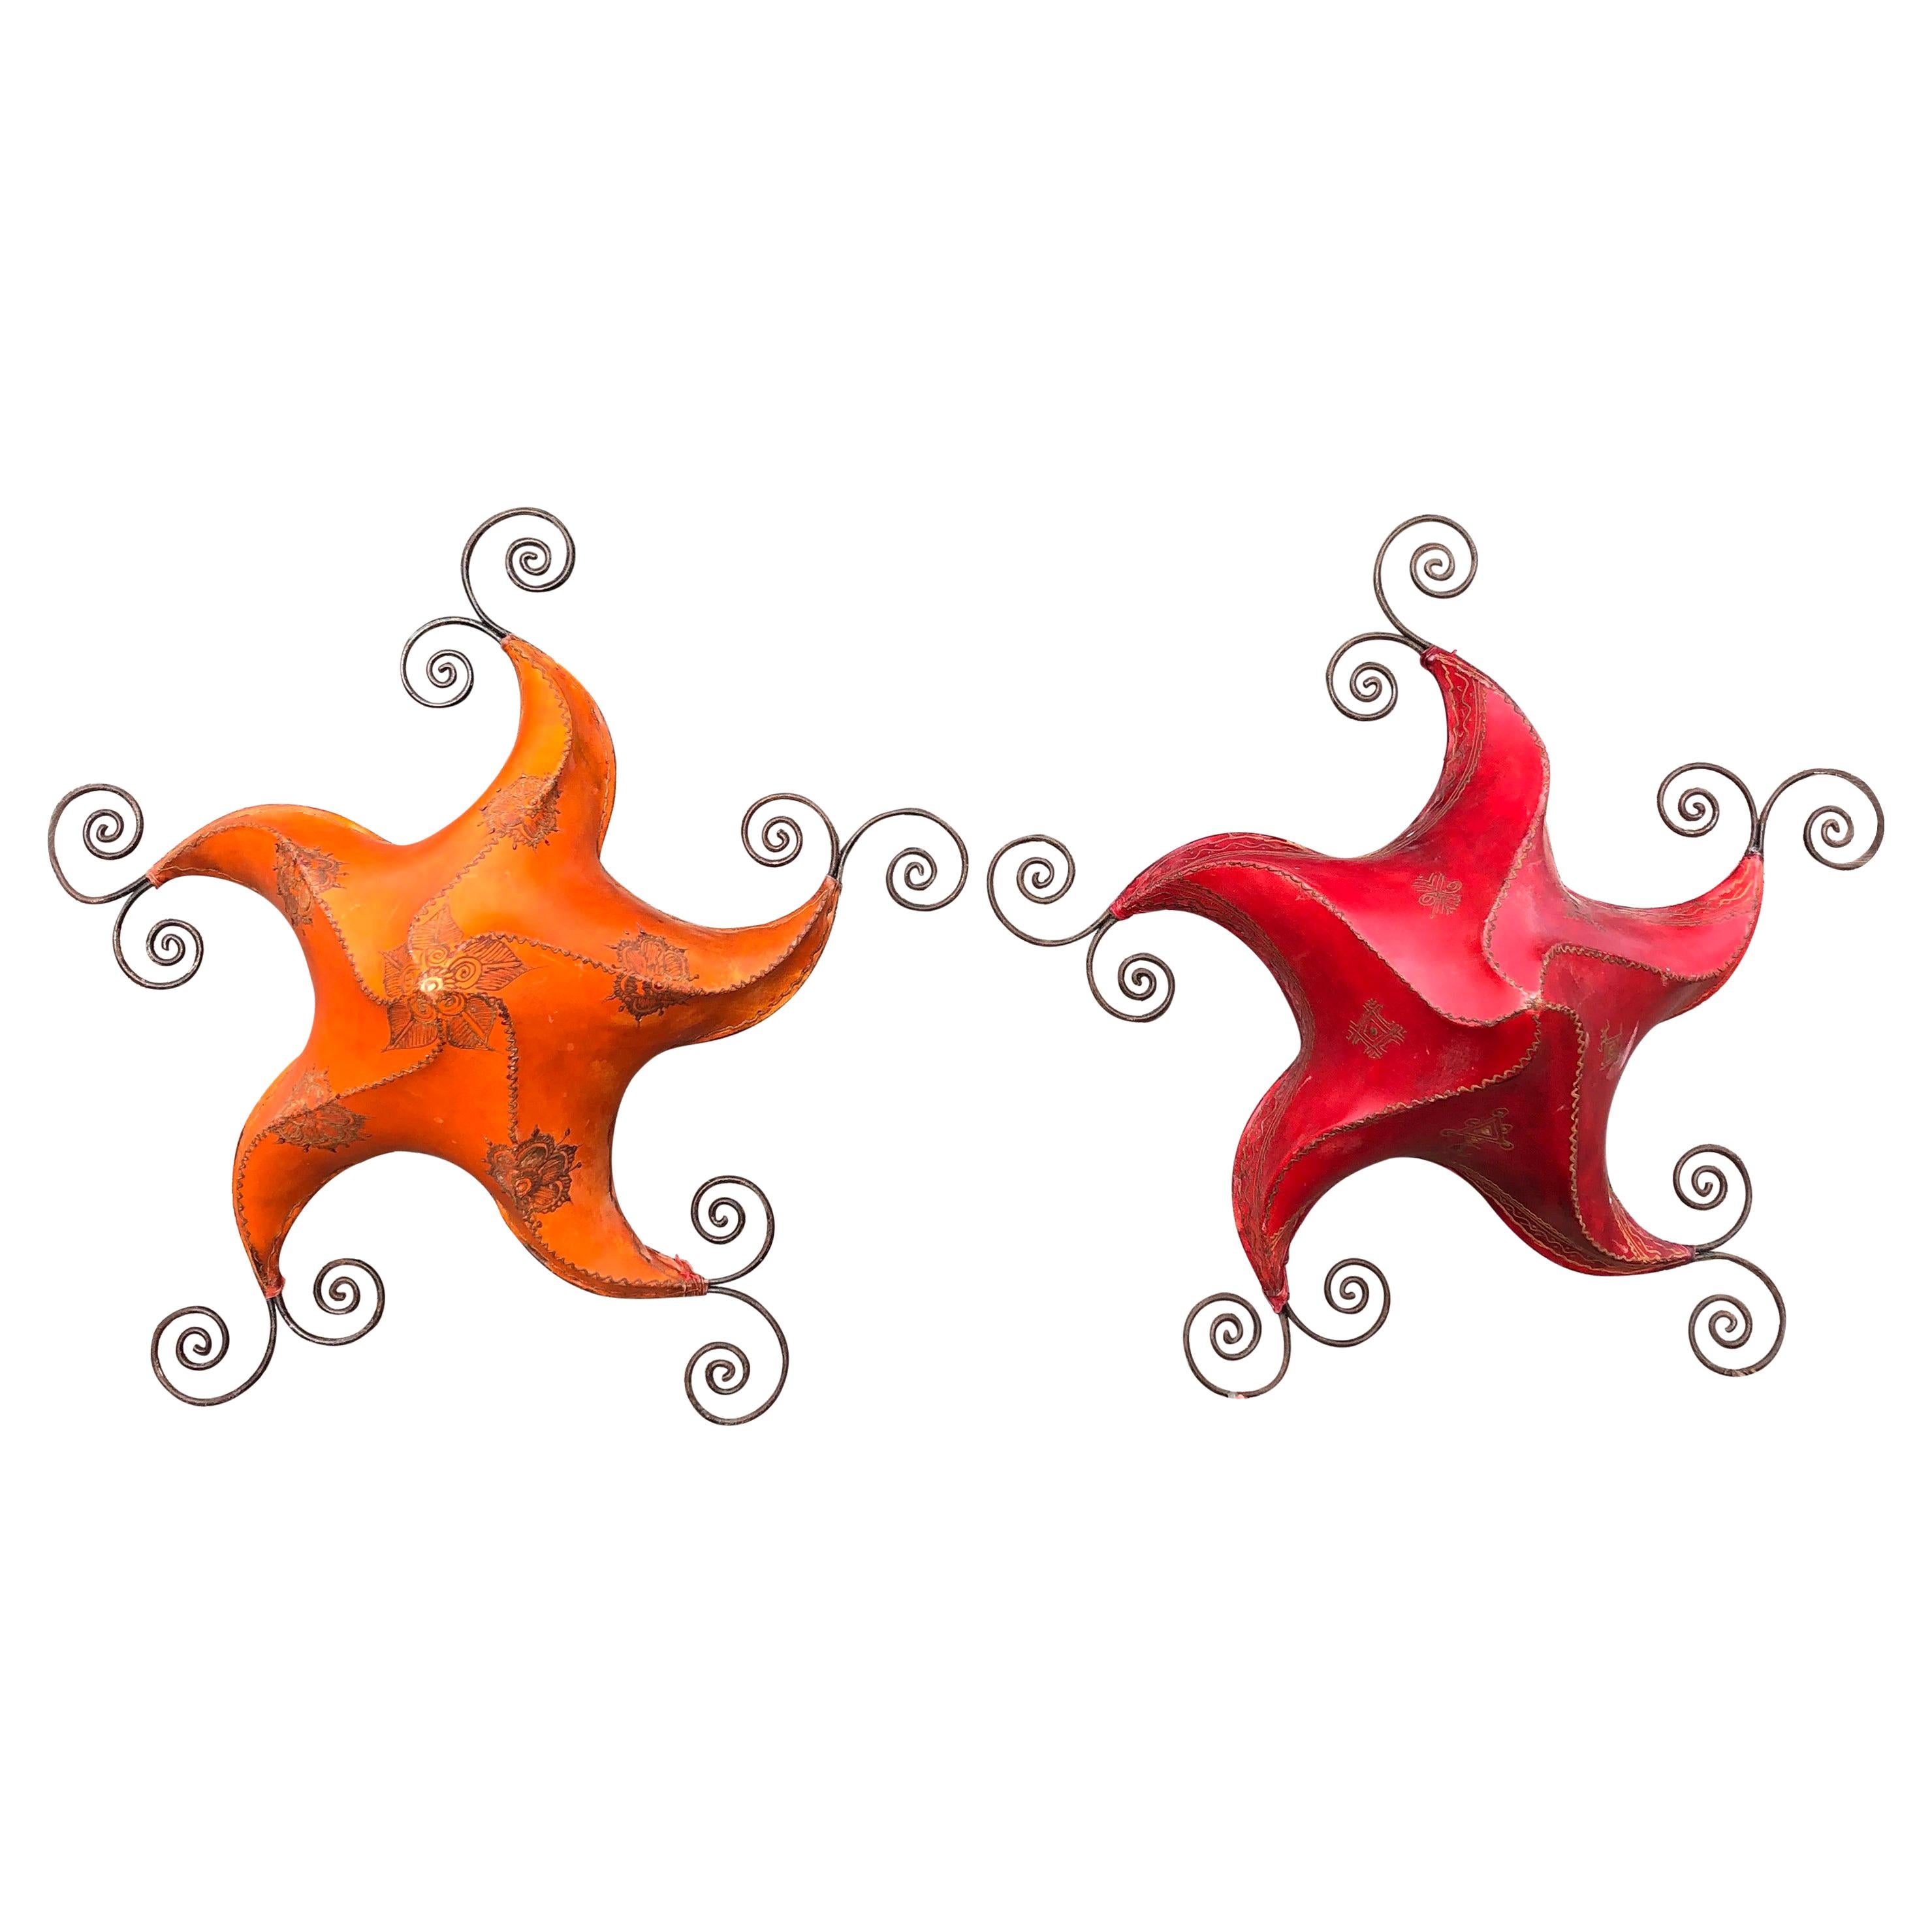 Artisan Pair of Arts & Crafts Handcrafted Leather Star Light Ornaments